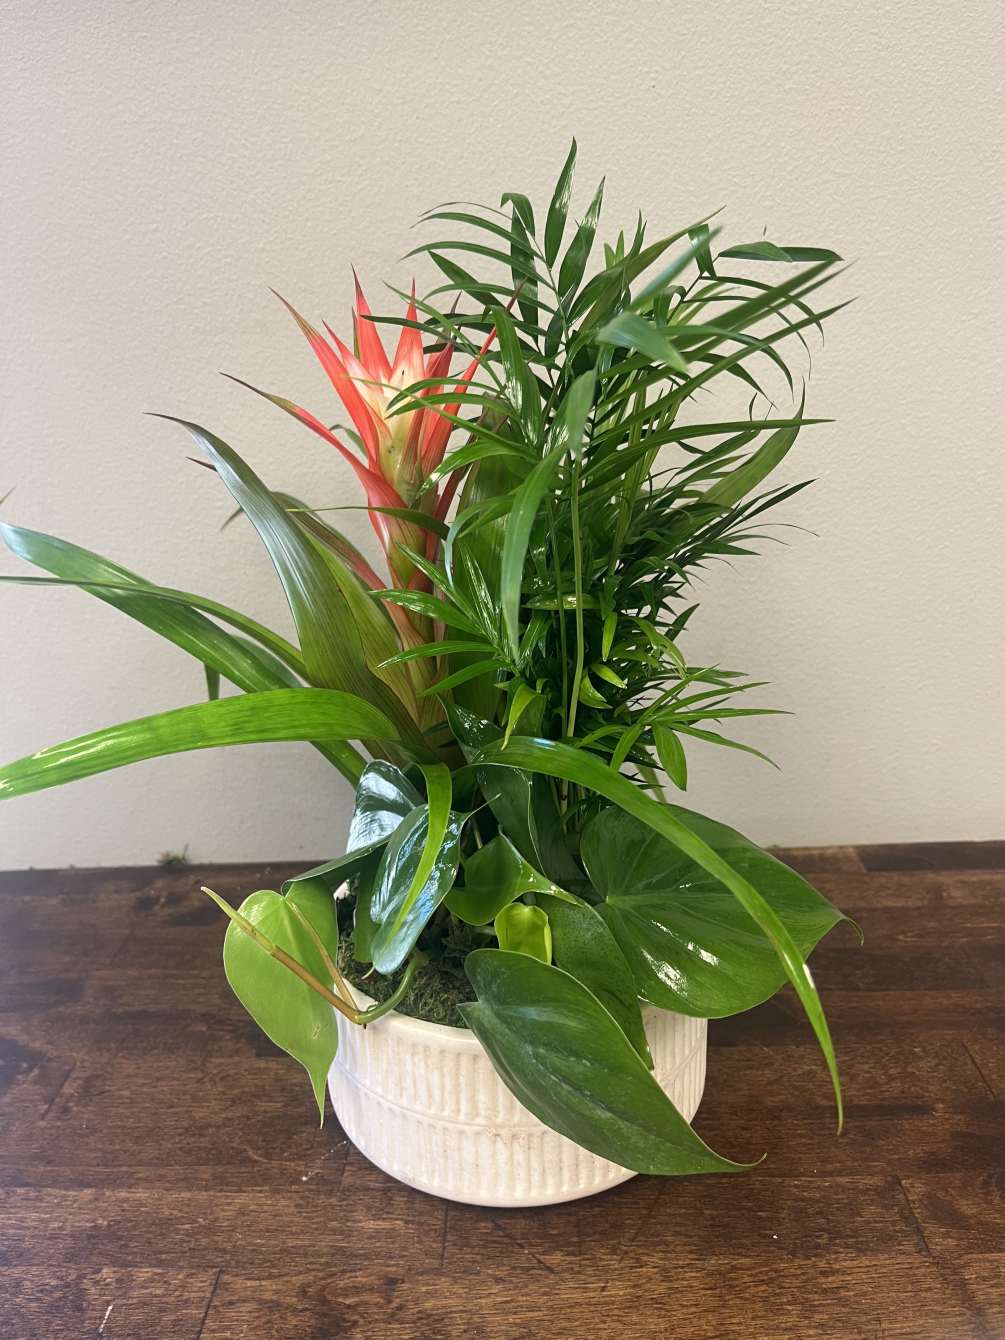 A colorful bromeliad plant with accompanying green plants in a modern ceramic